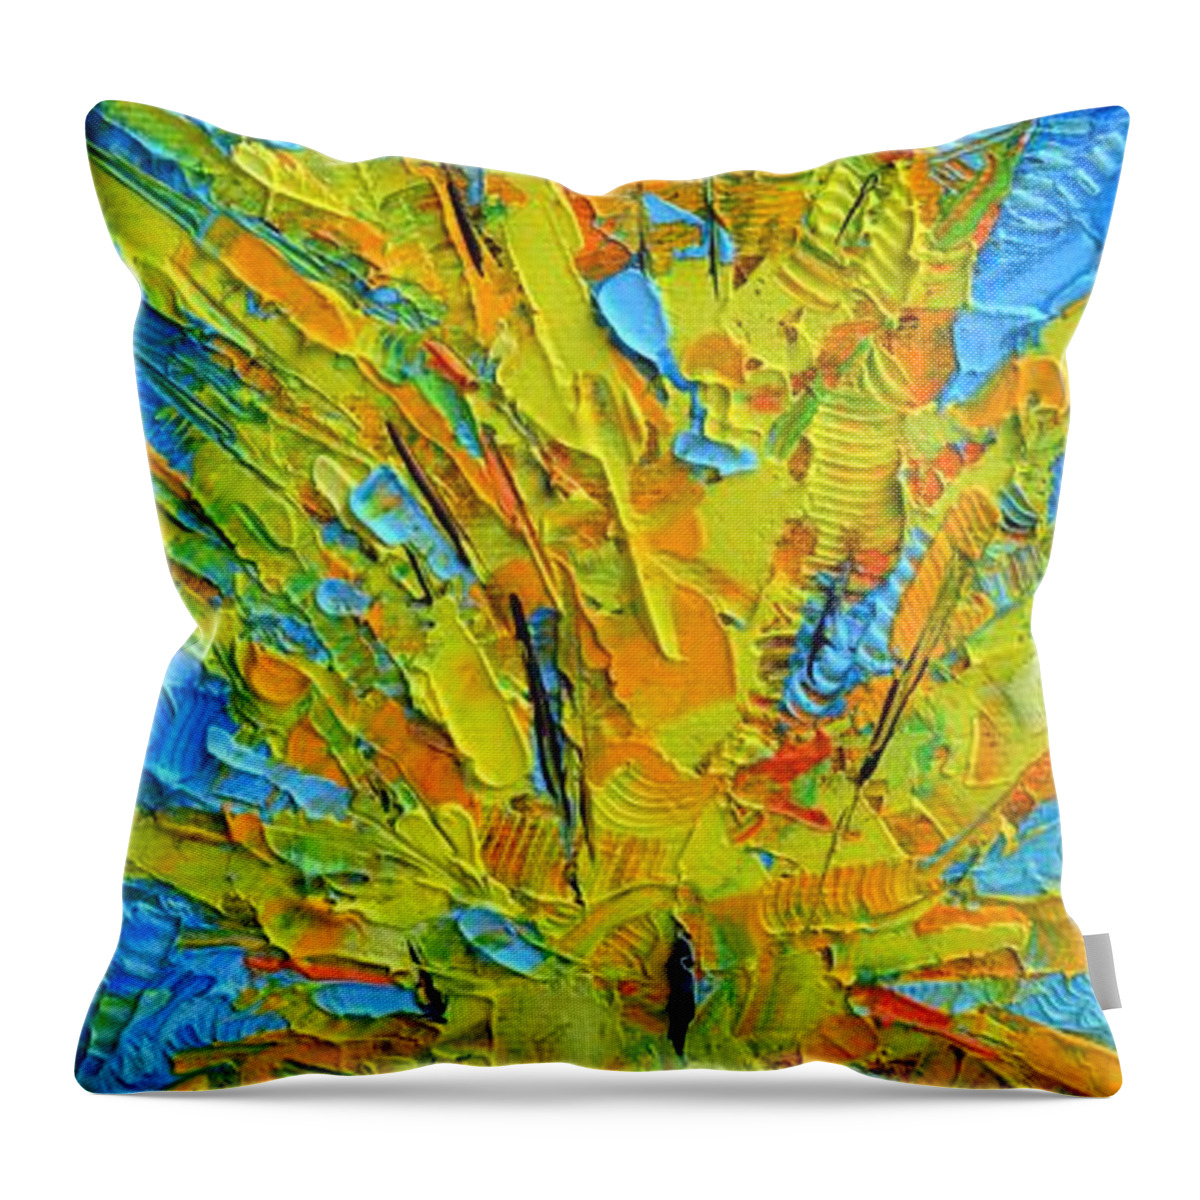 Spring Throw Pillow featuring the painting ABSTRACT FORSYTHIA textural impressionist impasto palette knife oil painting by Ana Maria Edulescu by Ana Maria Edulescu